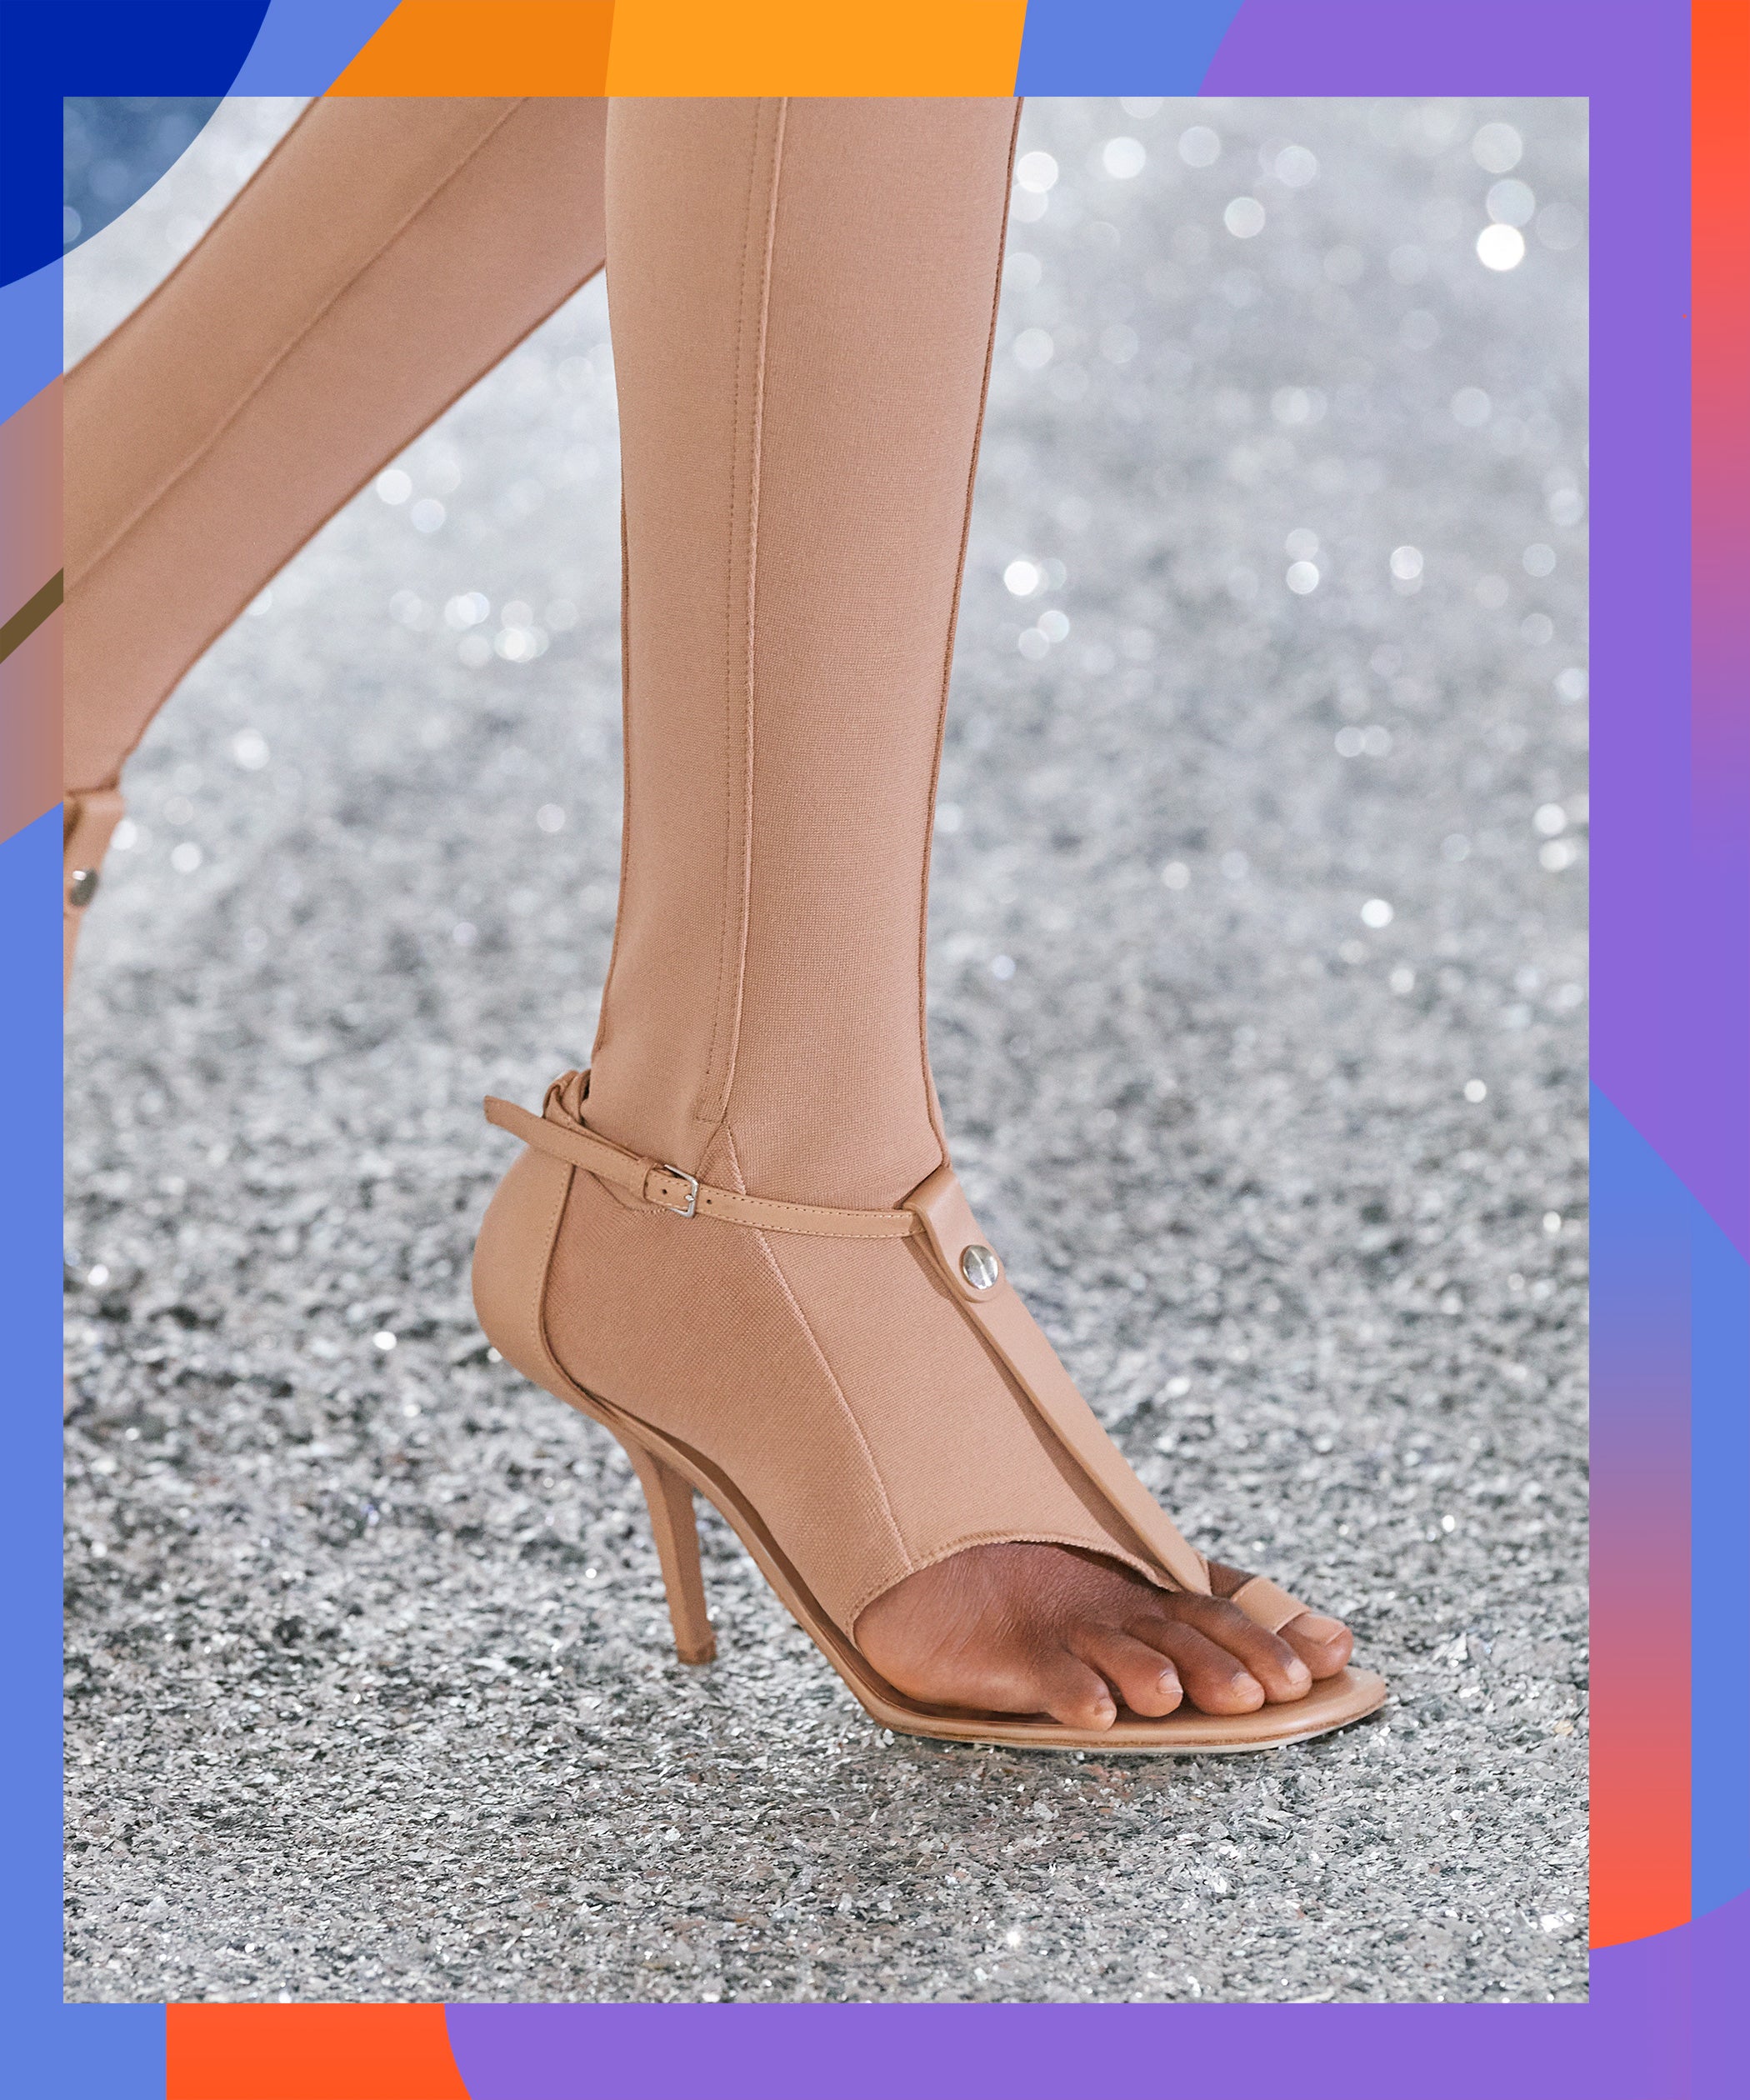 Thong Heel Sandals Are a Supermodel-Loved Summer Shoe Trend